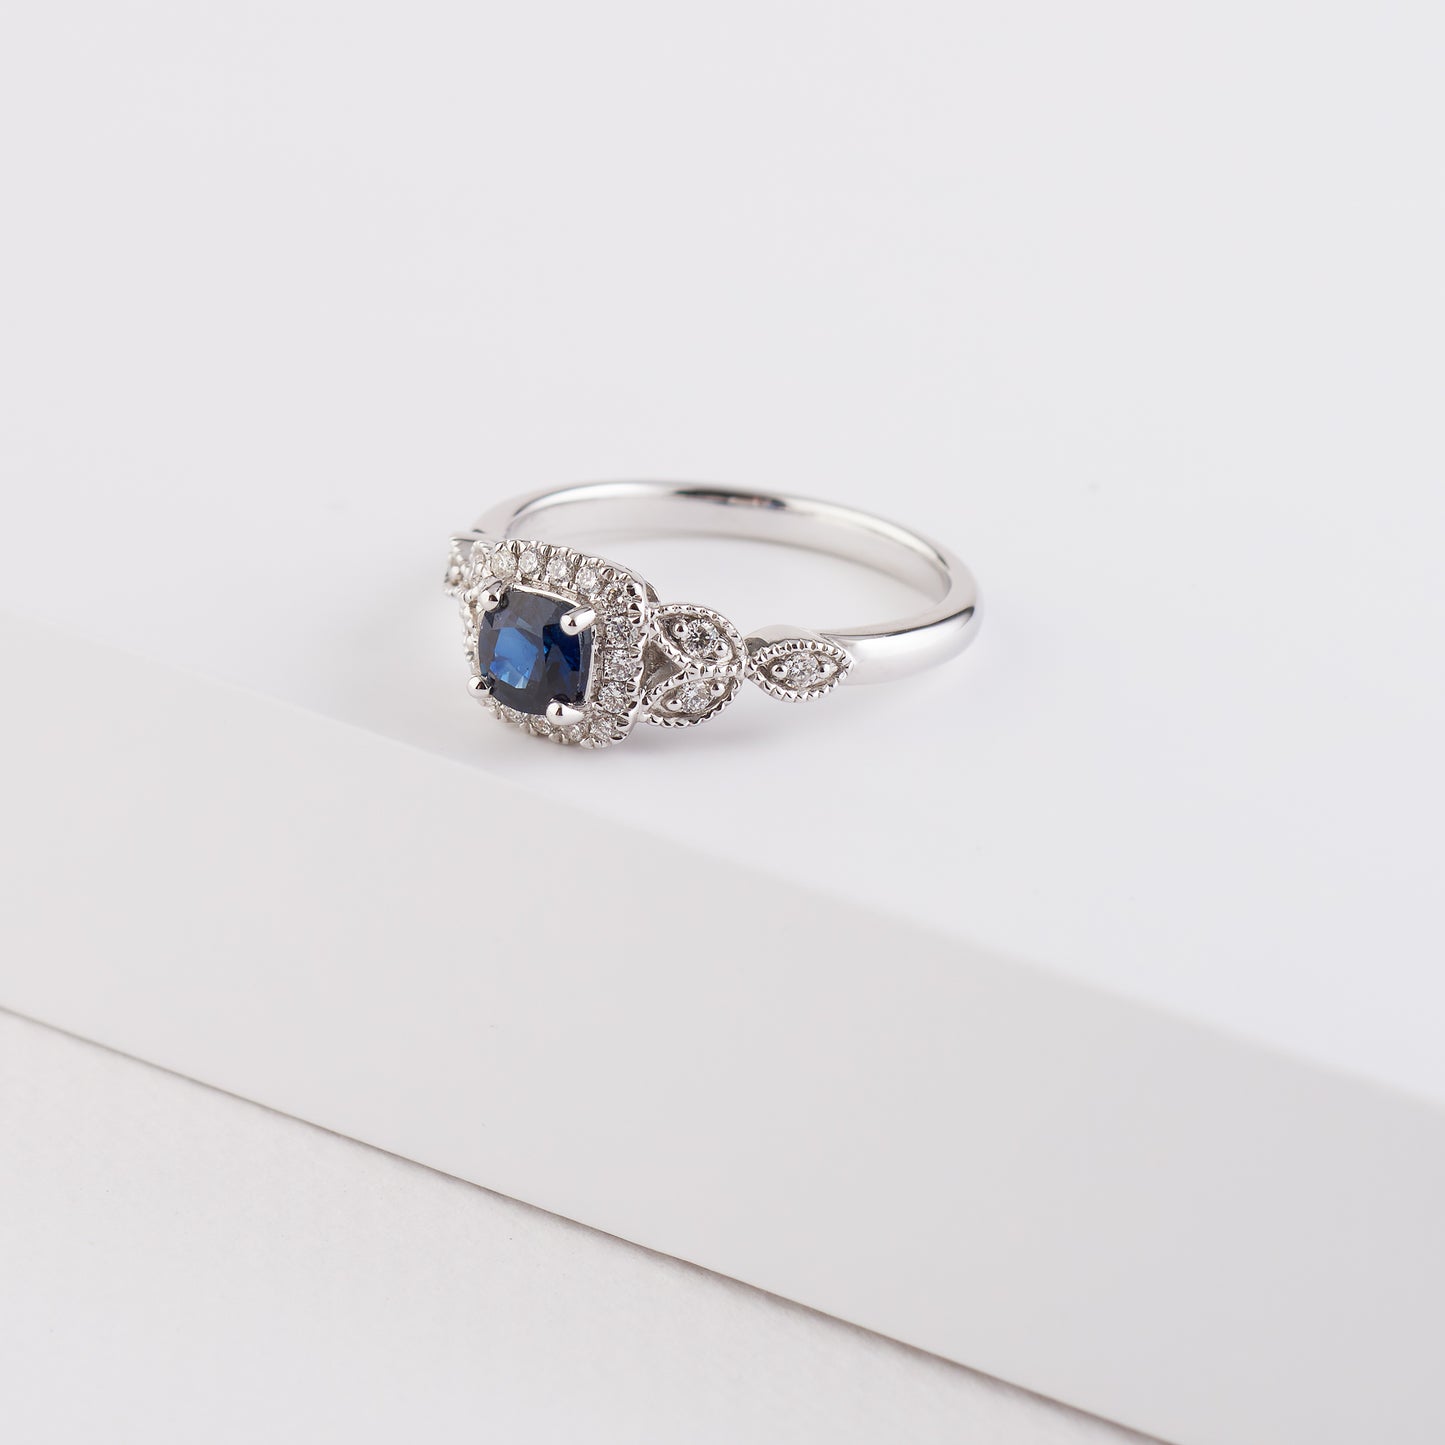 18K White Gold Ocean Blue Sapphire and Diamond Halo Ring.